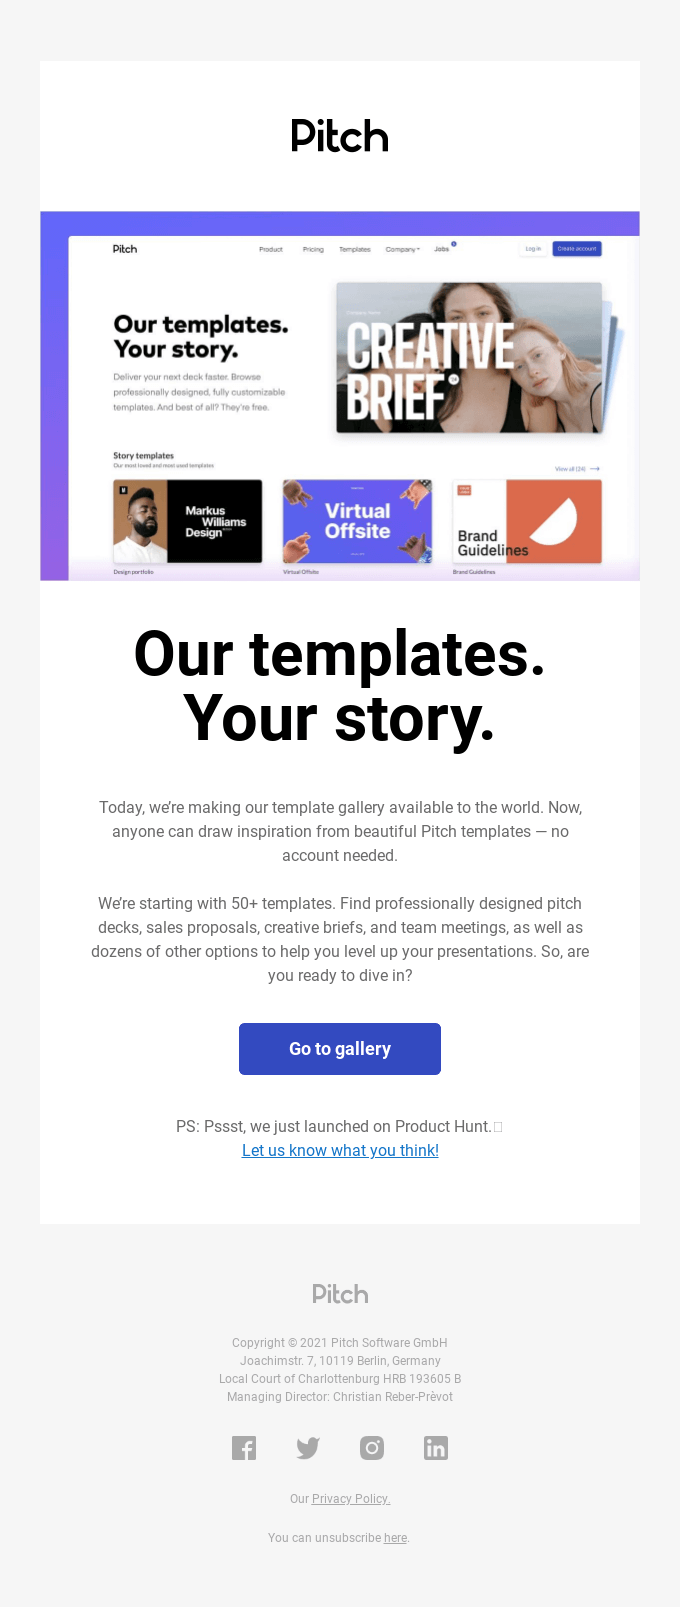 Introducing our public template gallery - Pitch Email Newsletter